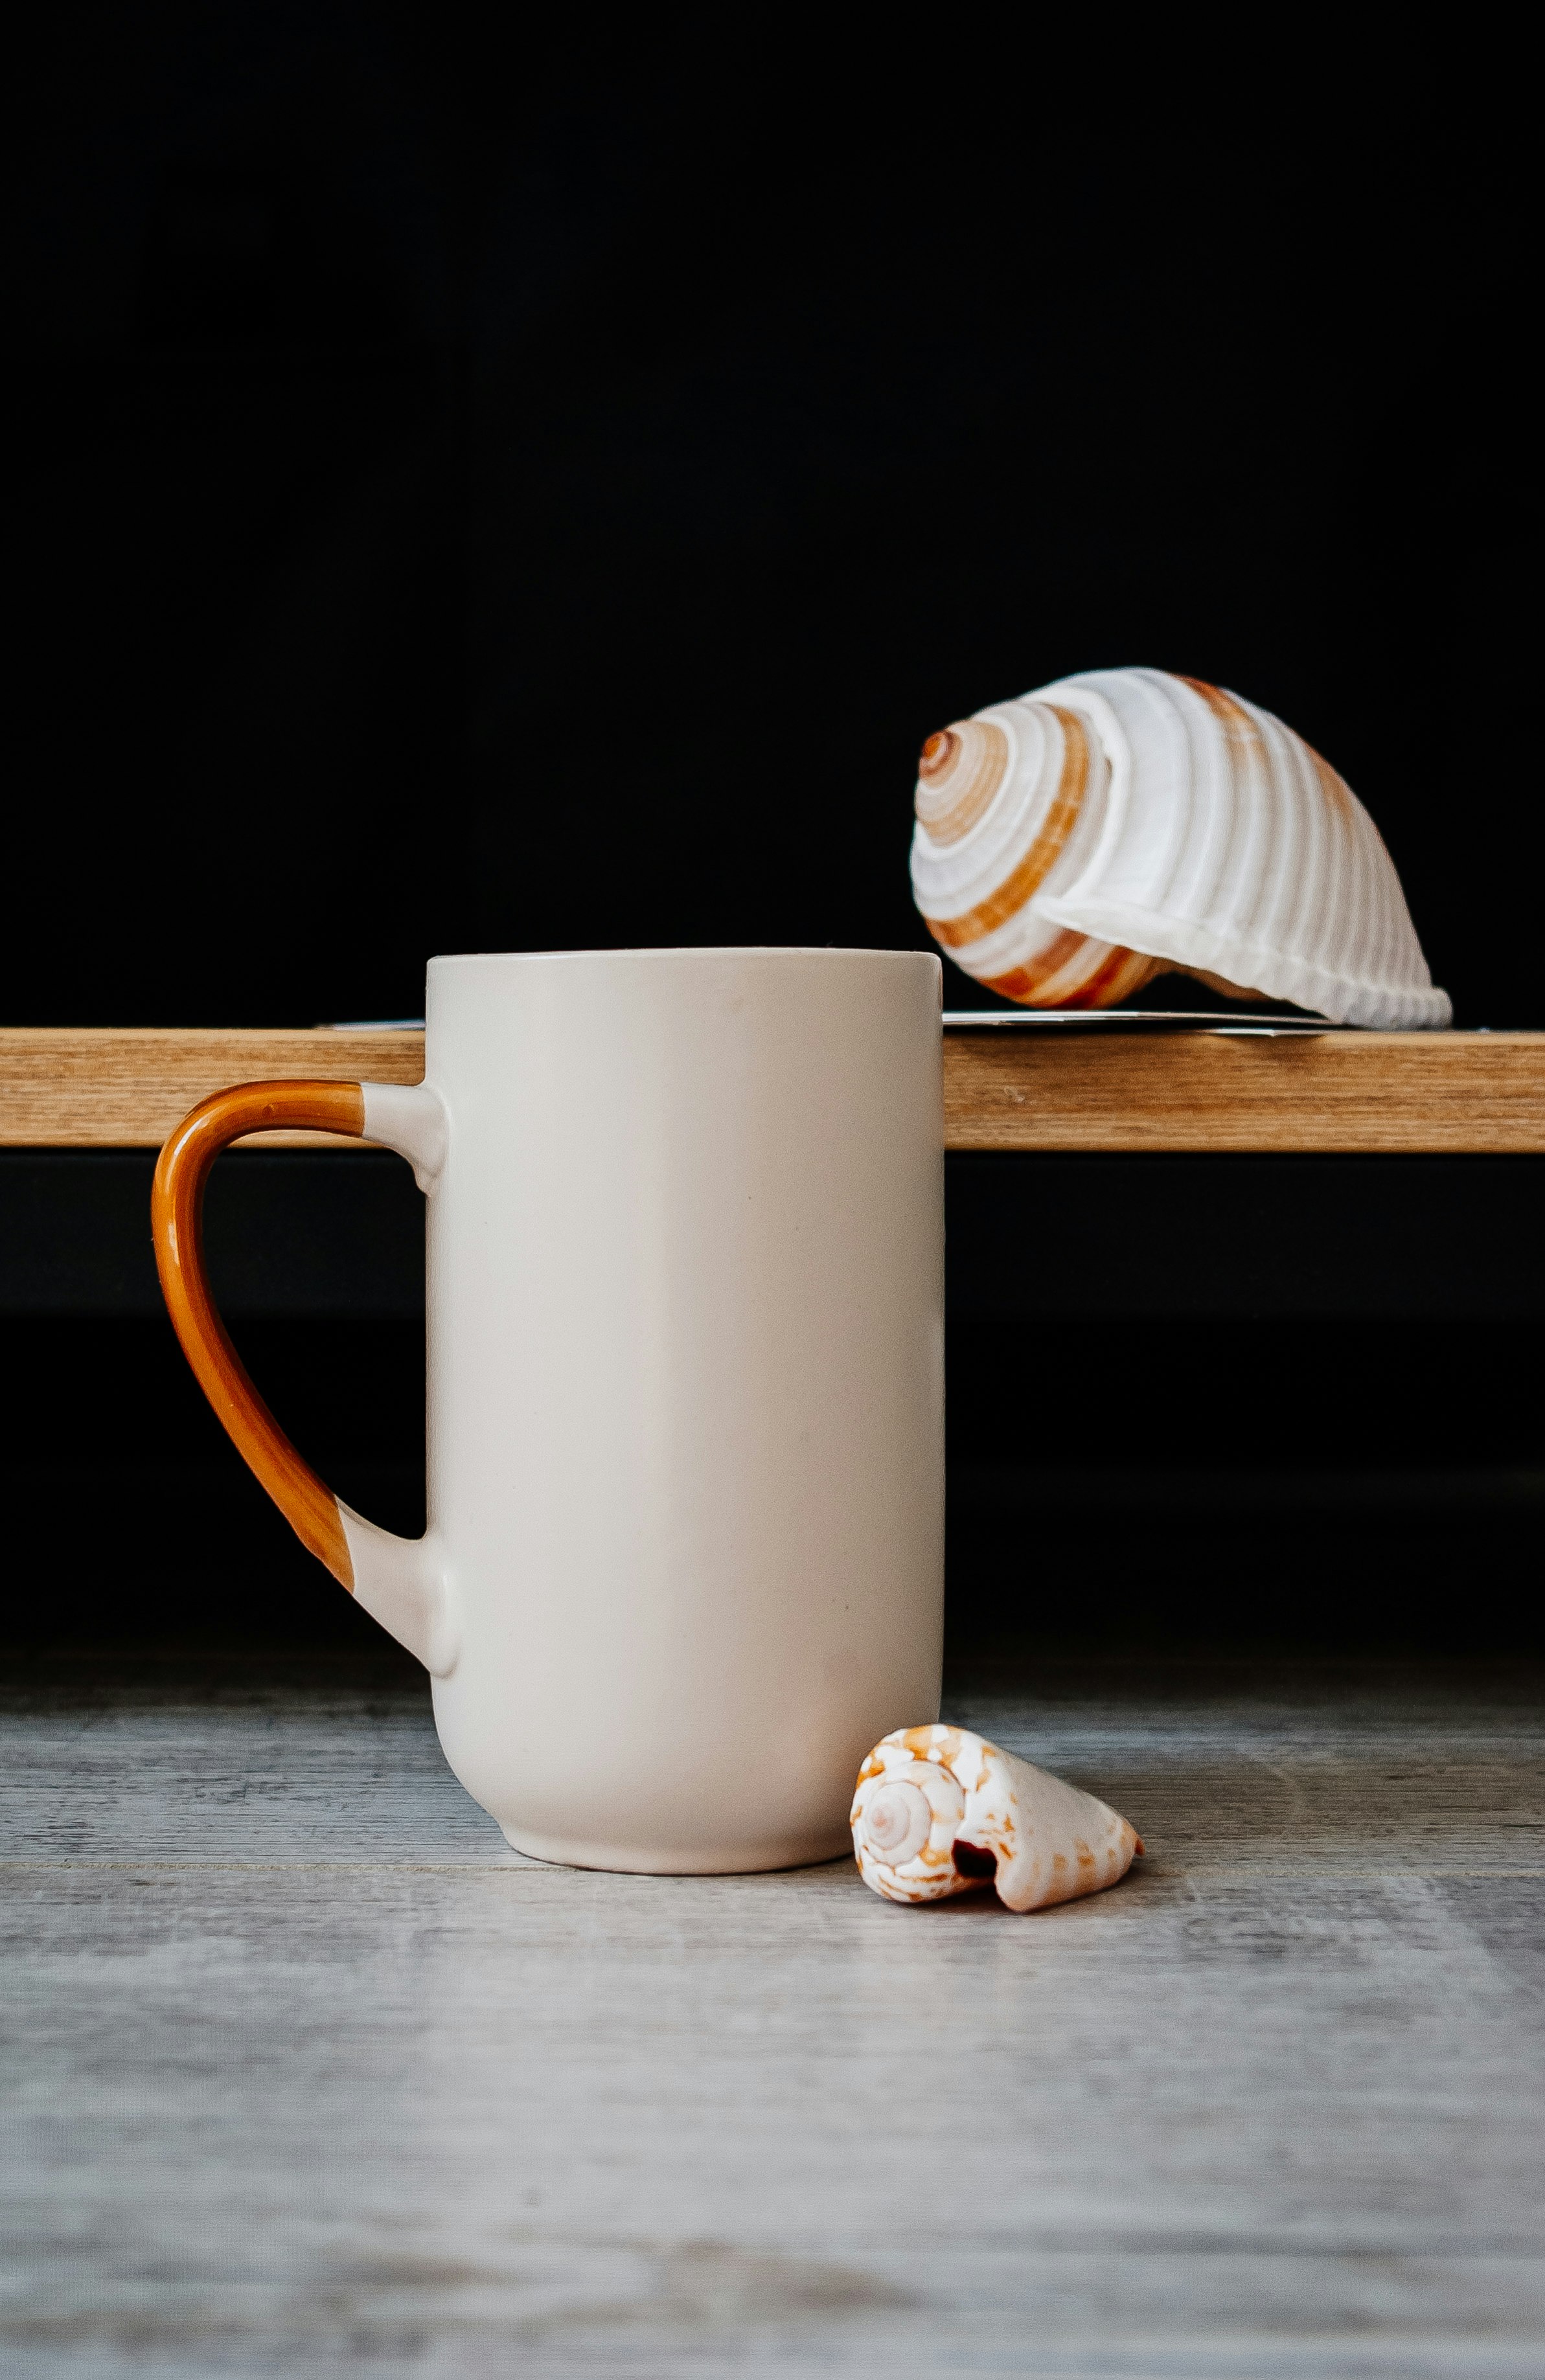 white and brown striped ceramic mug on brown wooden table